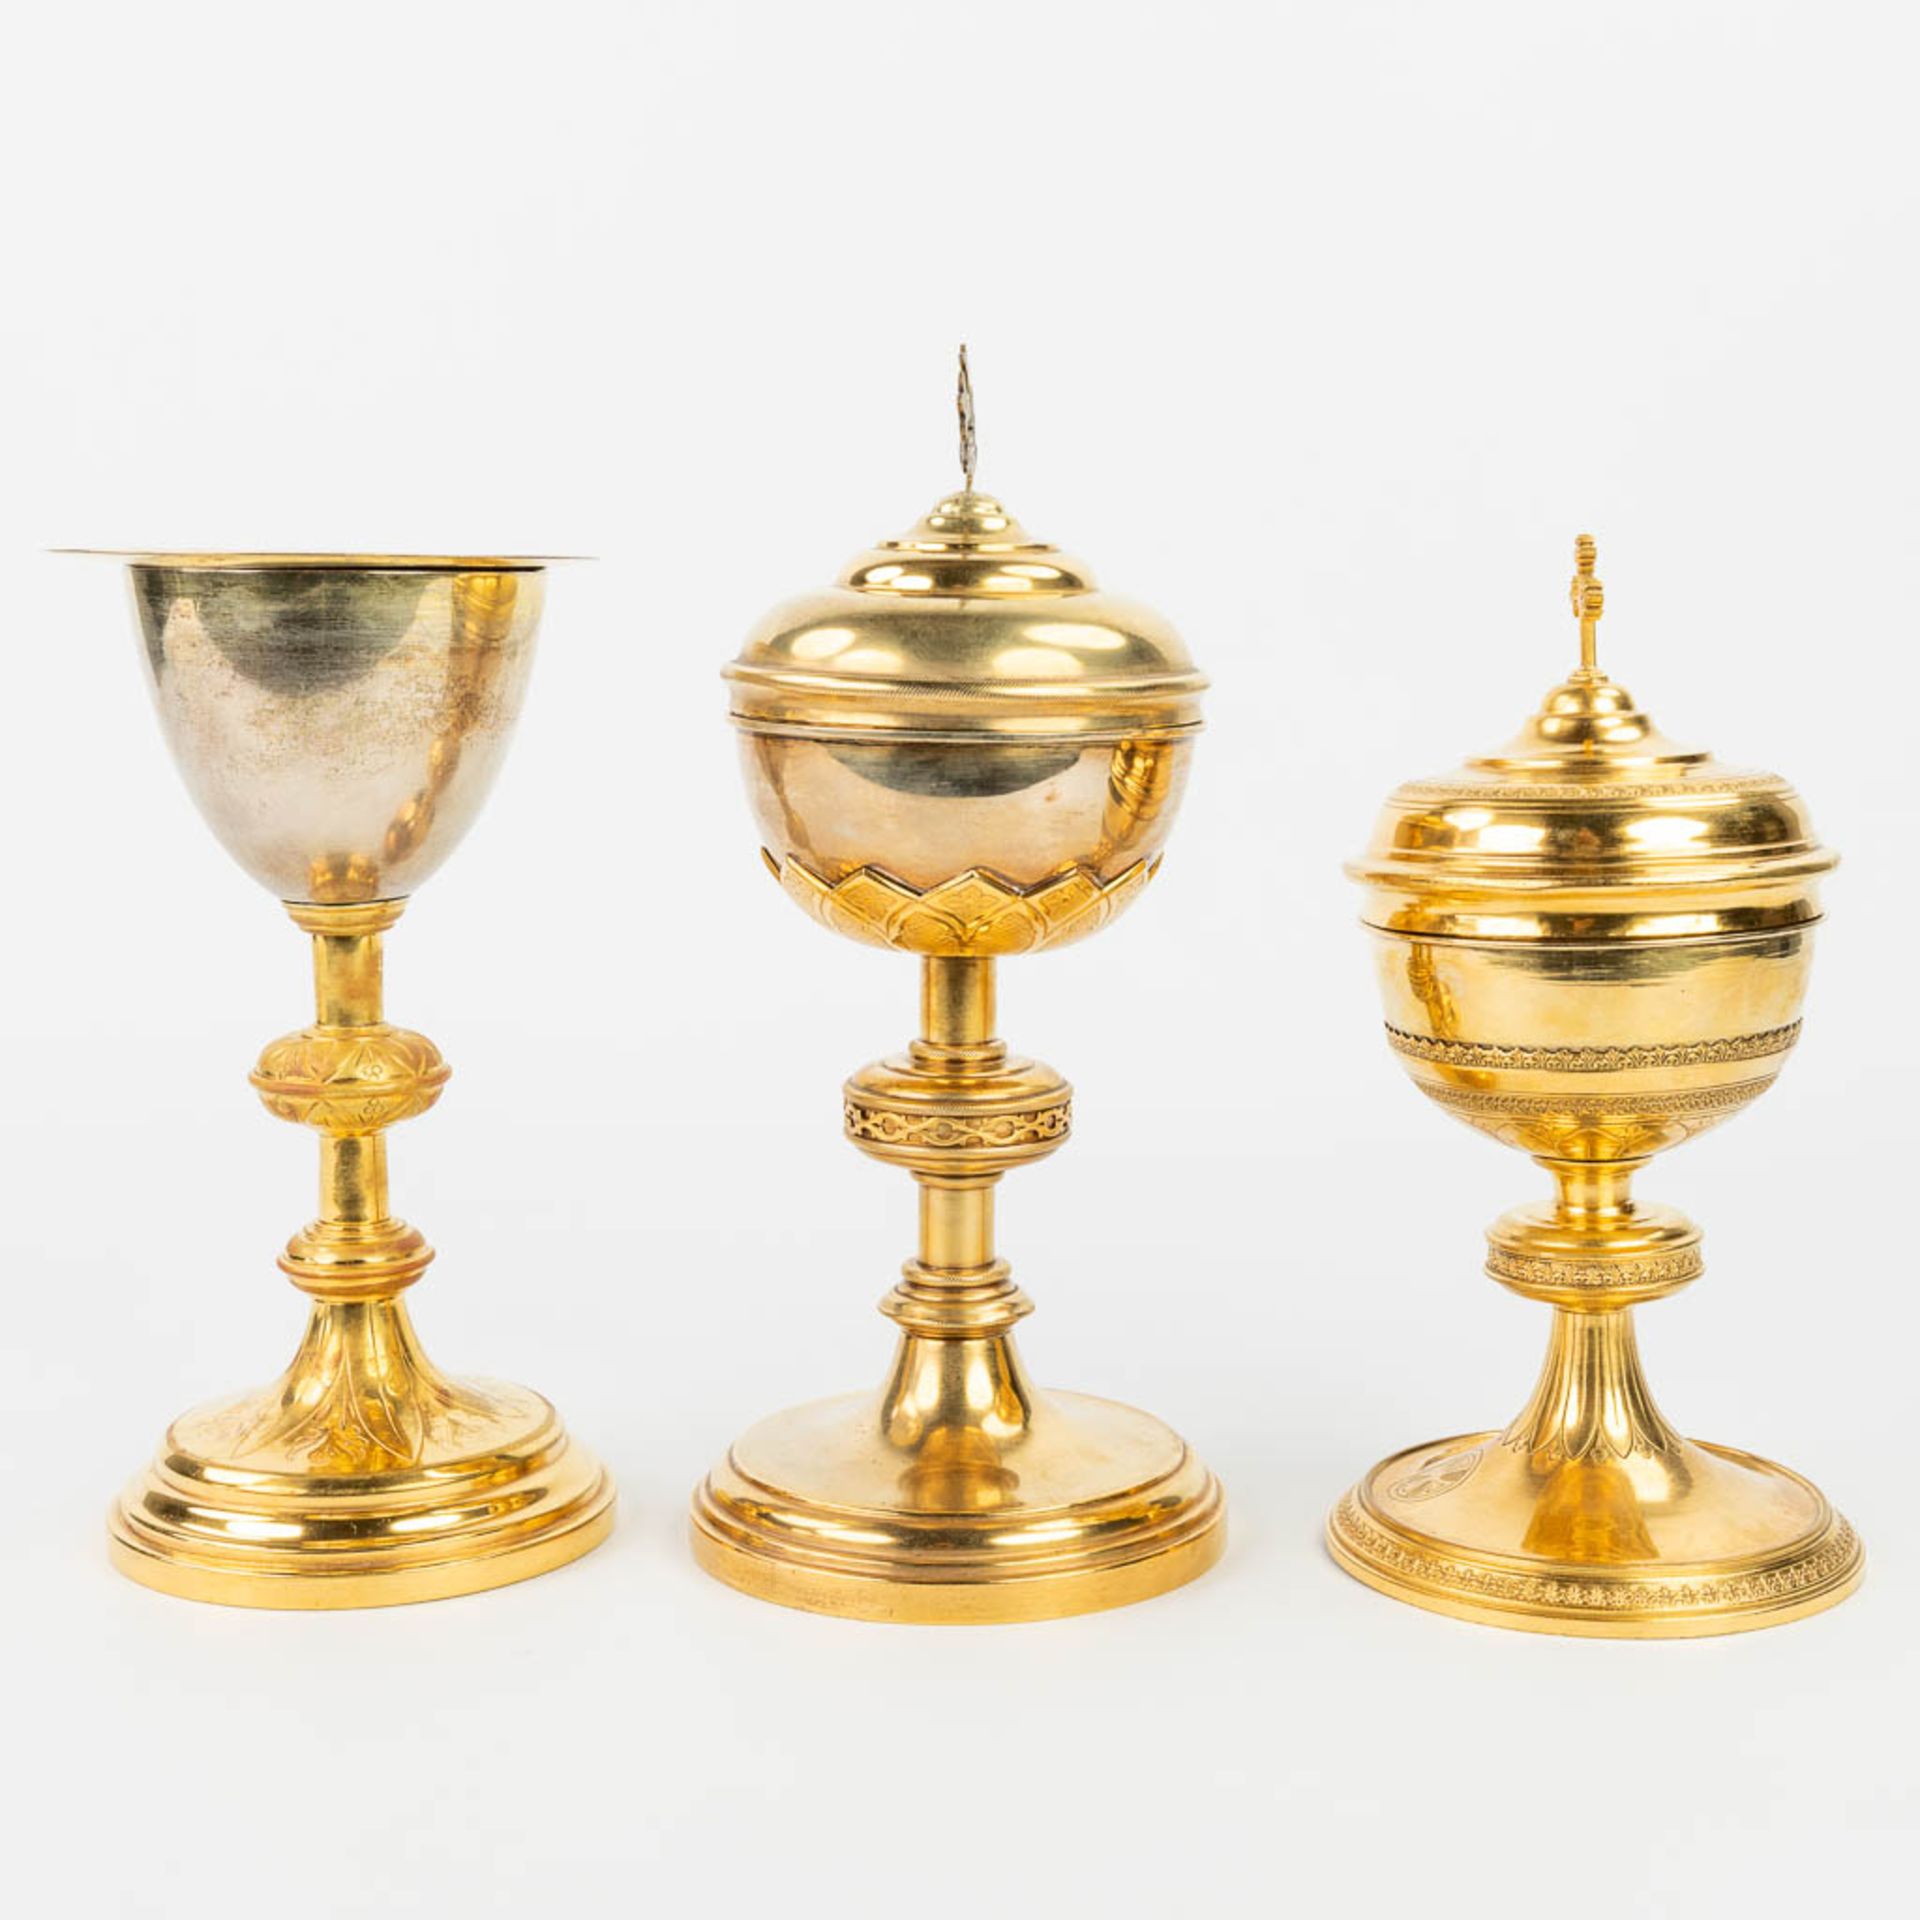 A collection of 4 large ciboria and a chalice made of silver and gold plated metal. - Image 14 of 24